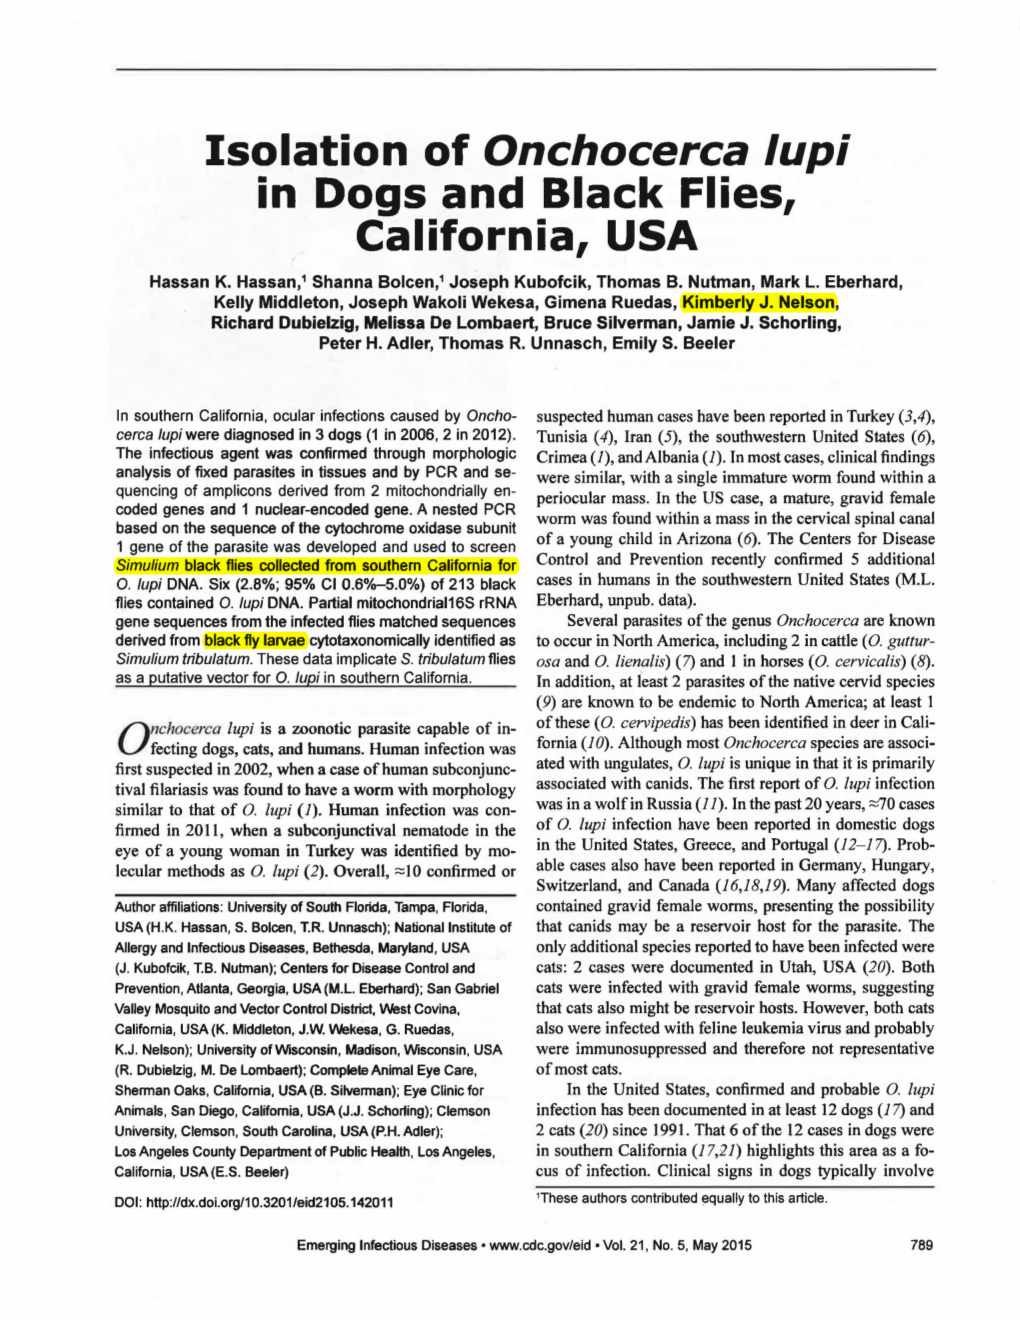 Isolation of Onchocerca Lupi in Dogs and Black Flies, California, USA Hassan K